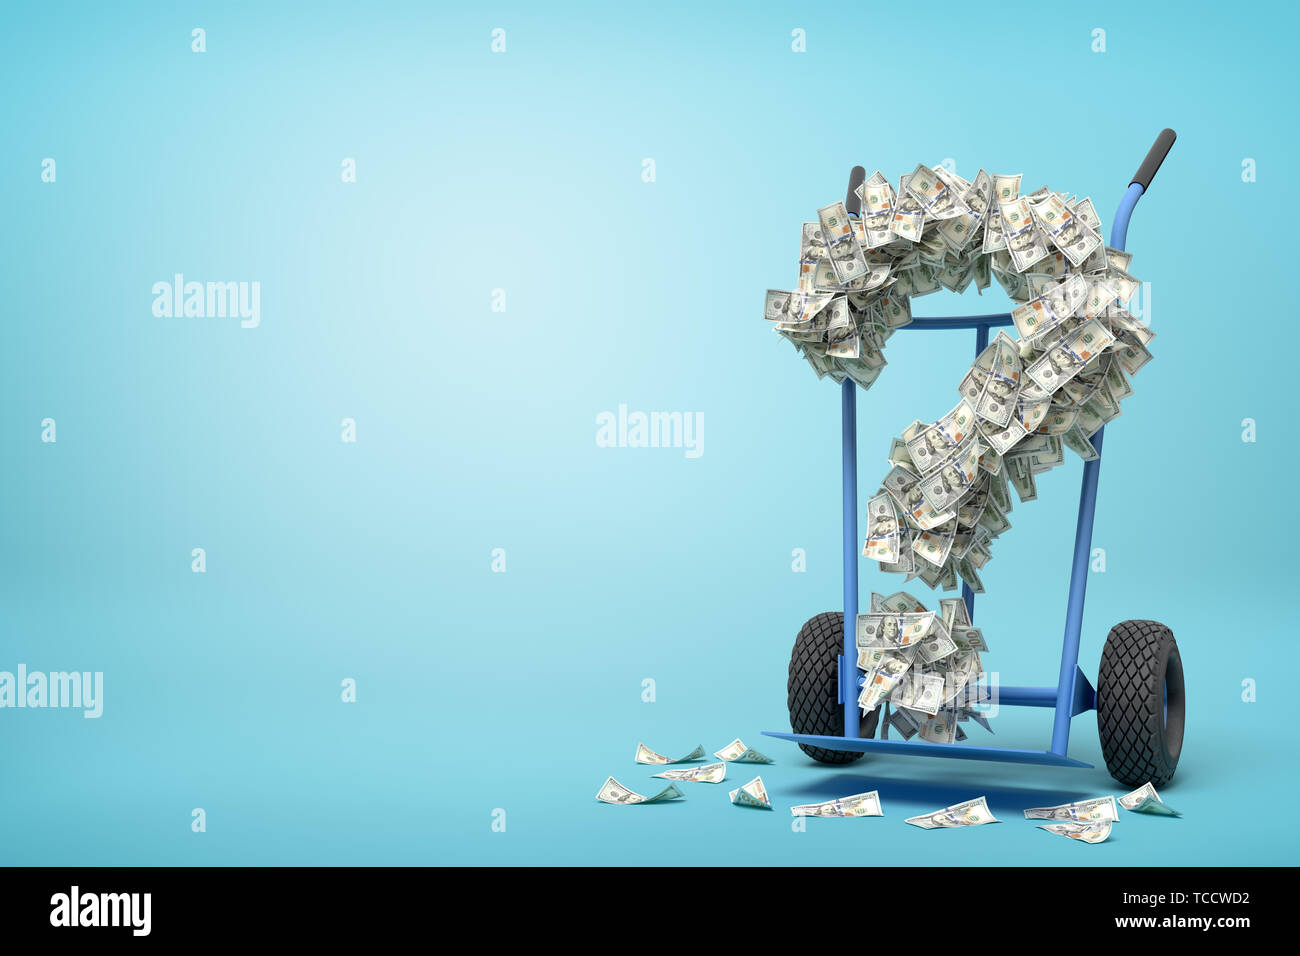 3d rendering of hand truck standing in half-turn with question mark made up of dollar banknotes on it on light-blue background with copy space. Stock Photo